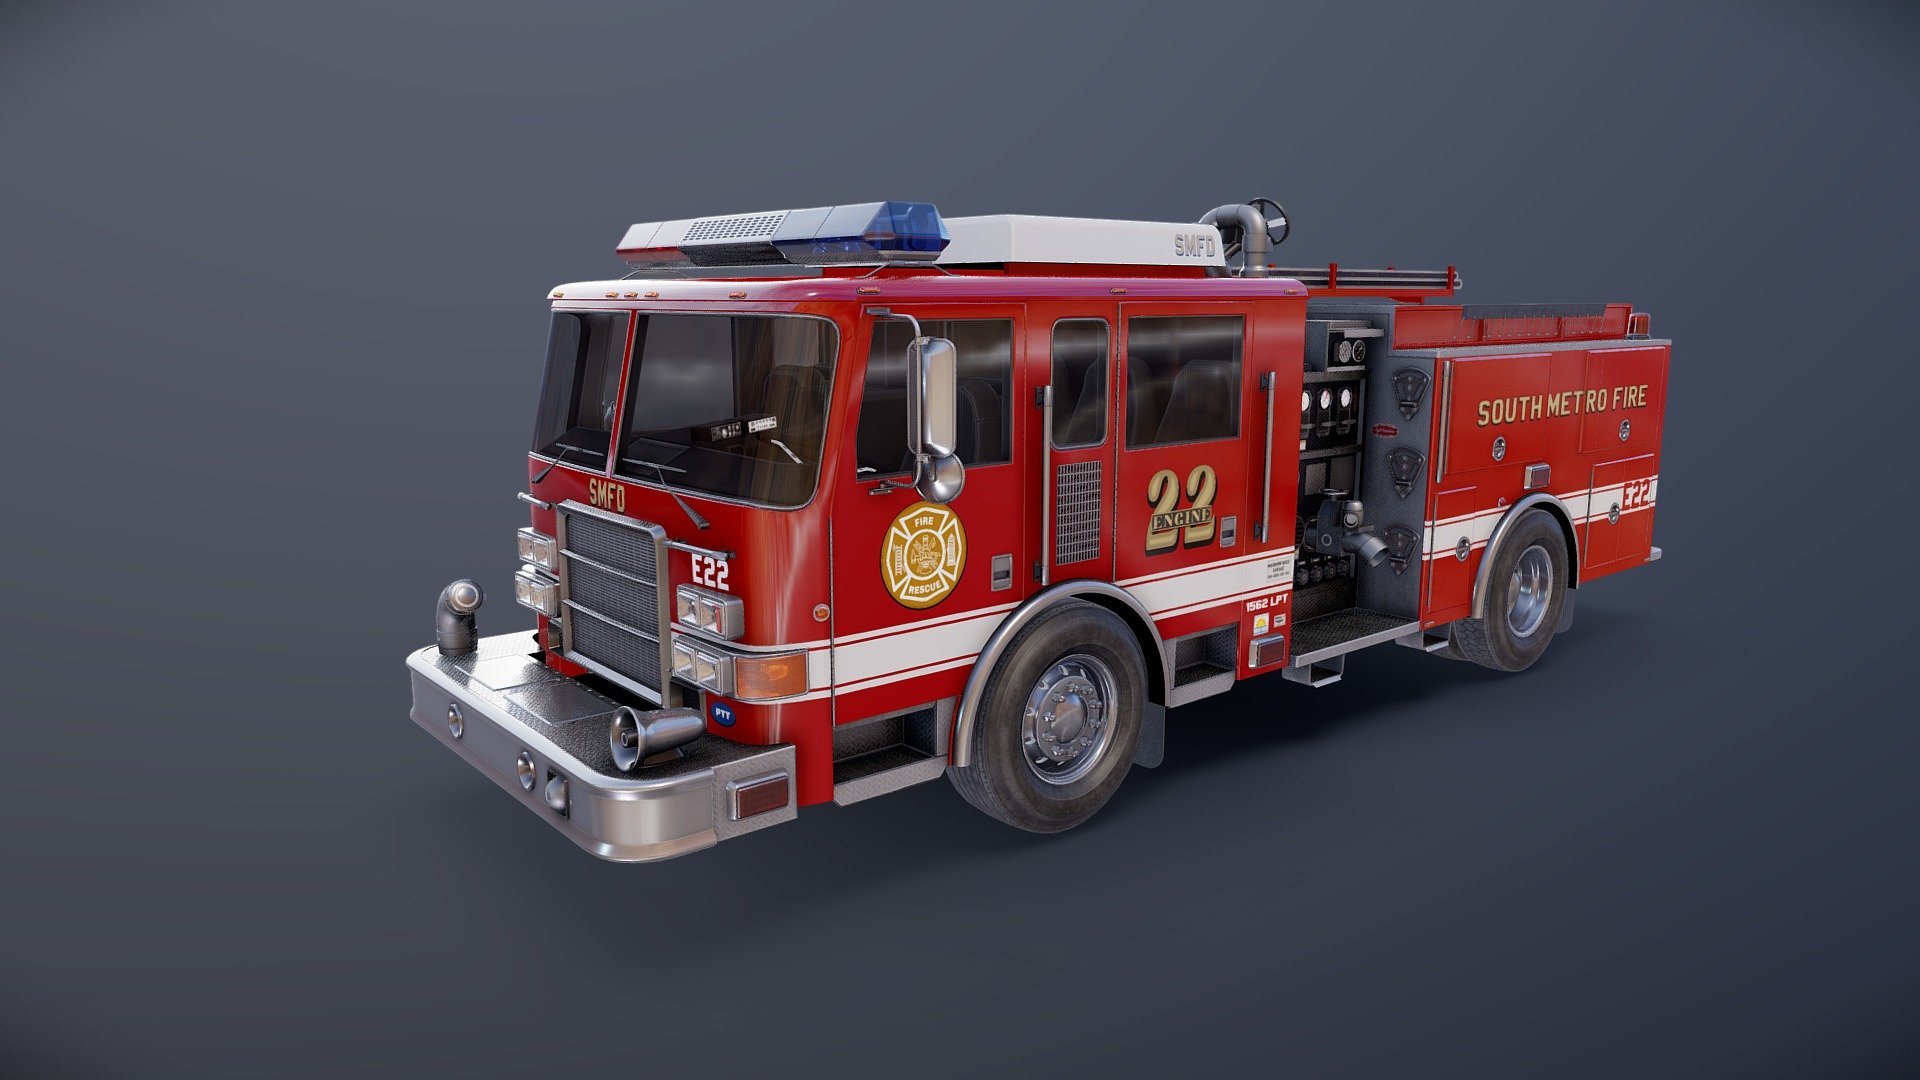 Seagrave marauder pump fire engine game ready model.

Full textured model with clean topology.

High accuracy exterior model.

Different tires for rear and front wheels.

High detailed cabin - seams, rivets, chrome parts, wipers and etc.

High detailed equipment - gauges, valves, tubes etc.

Lowpoly interior - 4049 tris 2289 verts.

Wheels - 15772 tris 8712 verts.

Full model - 98499 tris 60008 verts.

High detailed rims and tires, with PBR maps(Base_Color/Metallic/Normal/Roughness.png2048x2048 )

Original scale.

Lenght 9.6m , width 3.3m , height 3.4m.

Model ready for real-time apps, games, virtual reality and augmented reality.

Asset looks accuracy and realistic and become a good part of your project 3d model